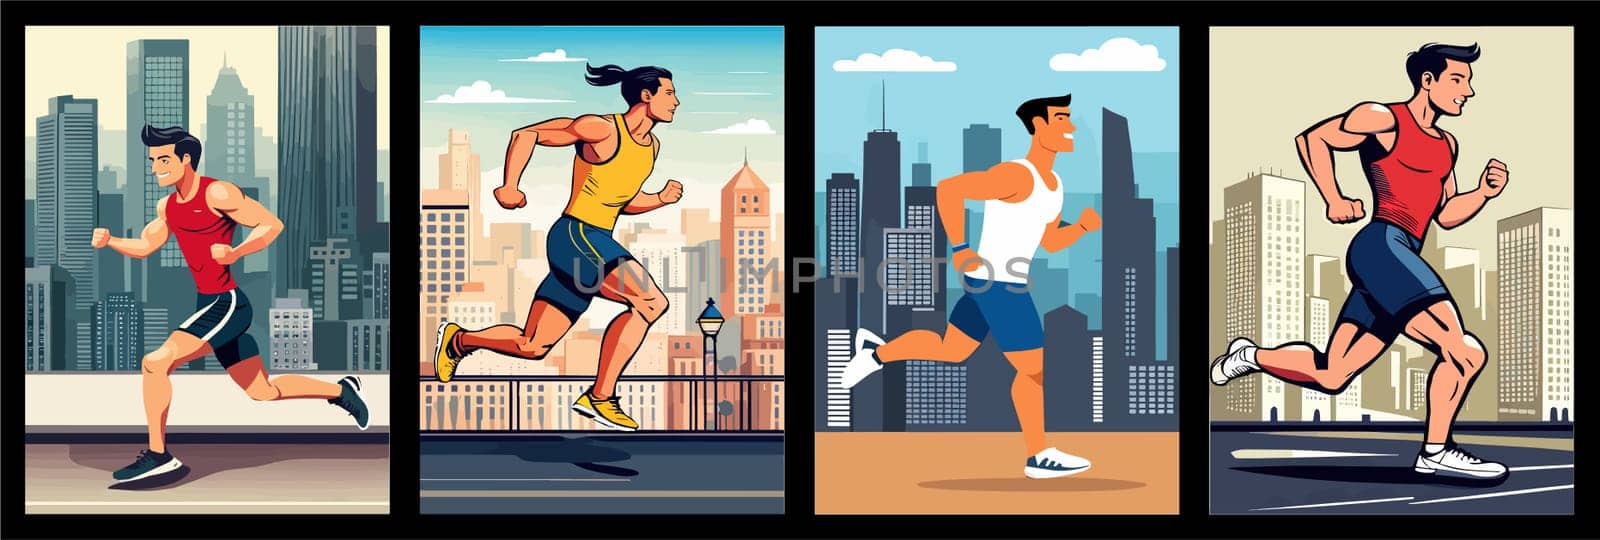 Banner Runners set. Flat concept illustrations athletes running in park, forest, stadium track or street landscape. Healthy activity and lifestyle. Sprint, jogging, warming up.